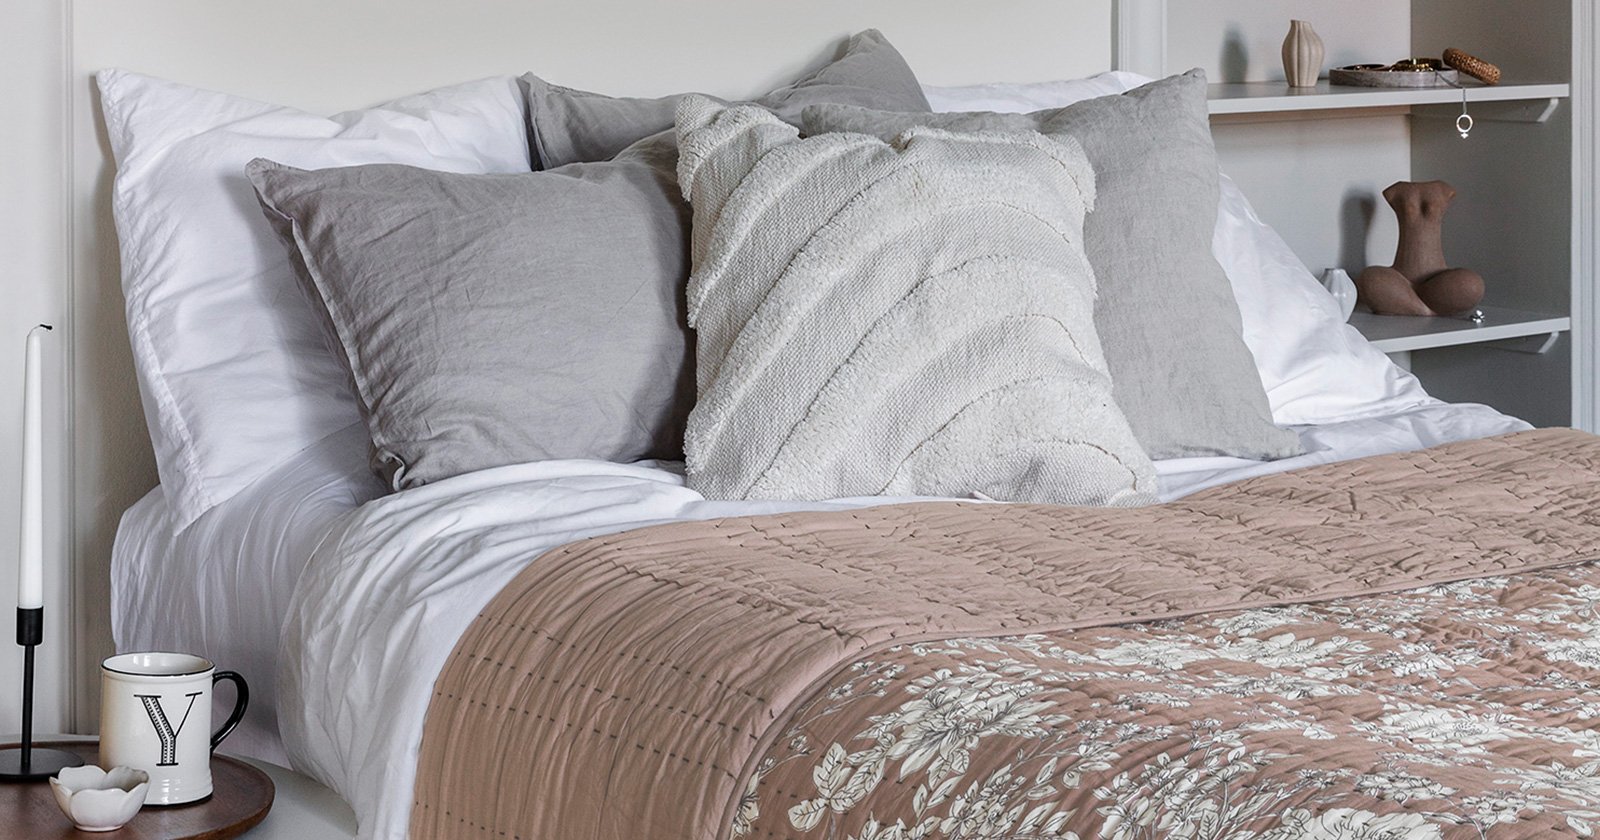 A bed with fluffy pillows in light colours. A quilted, patterned dusty pink bedspread from Indiska is placed on the bed